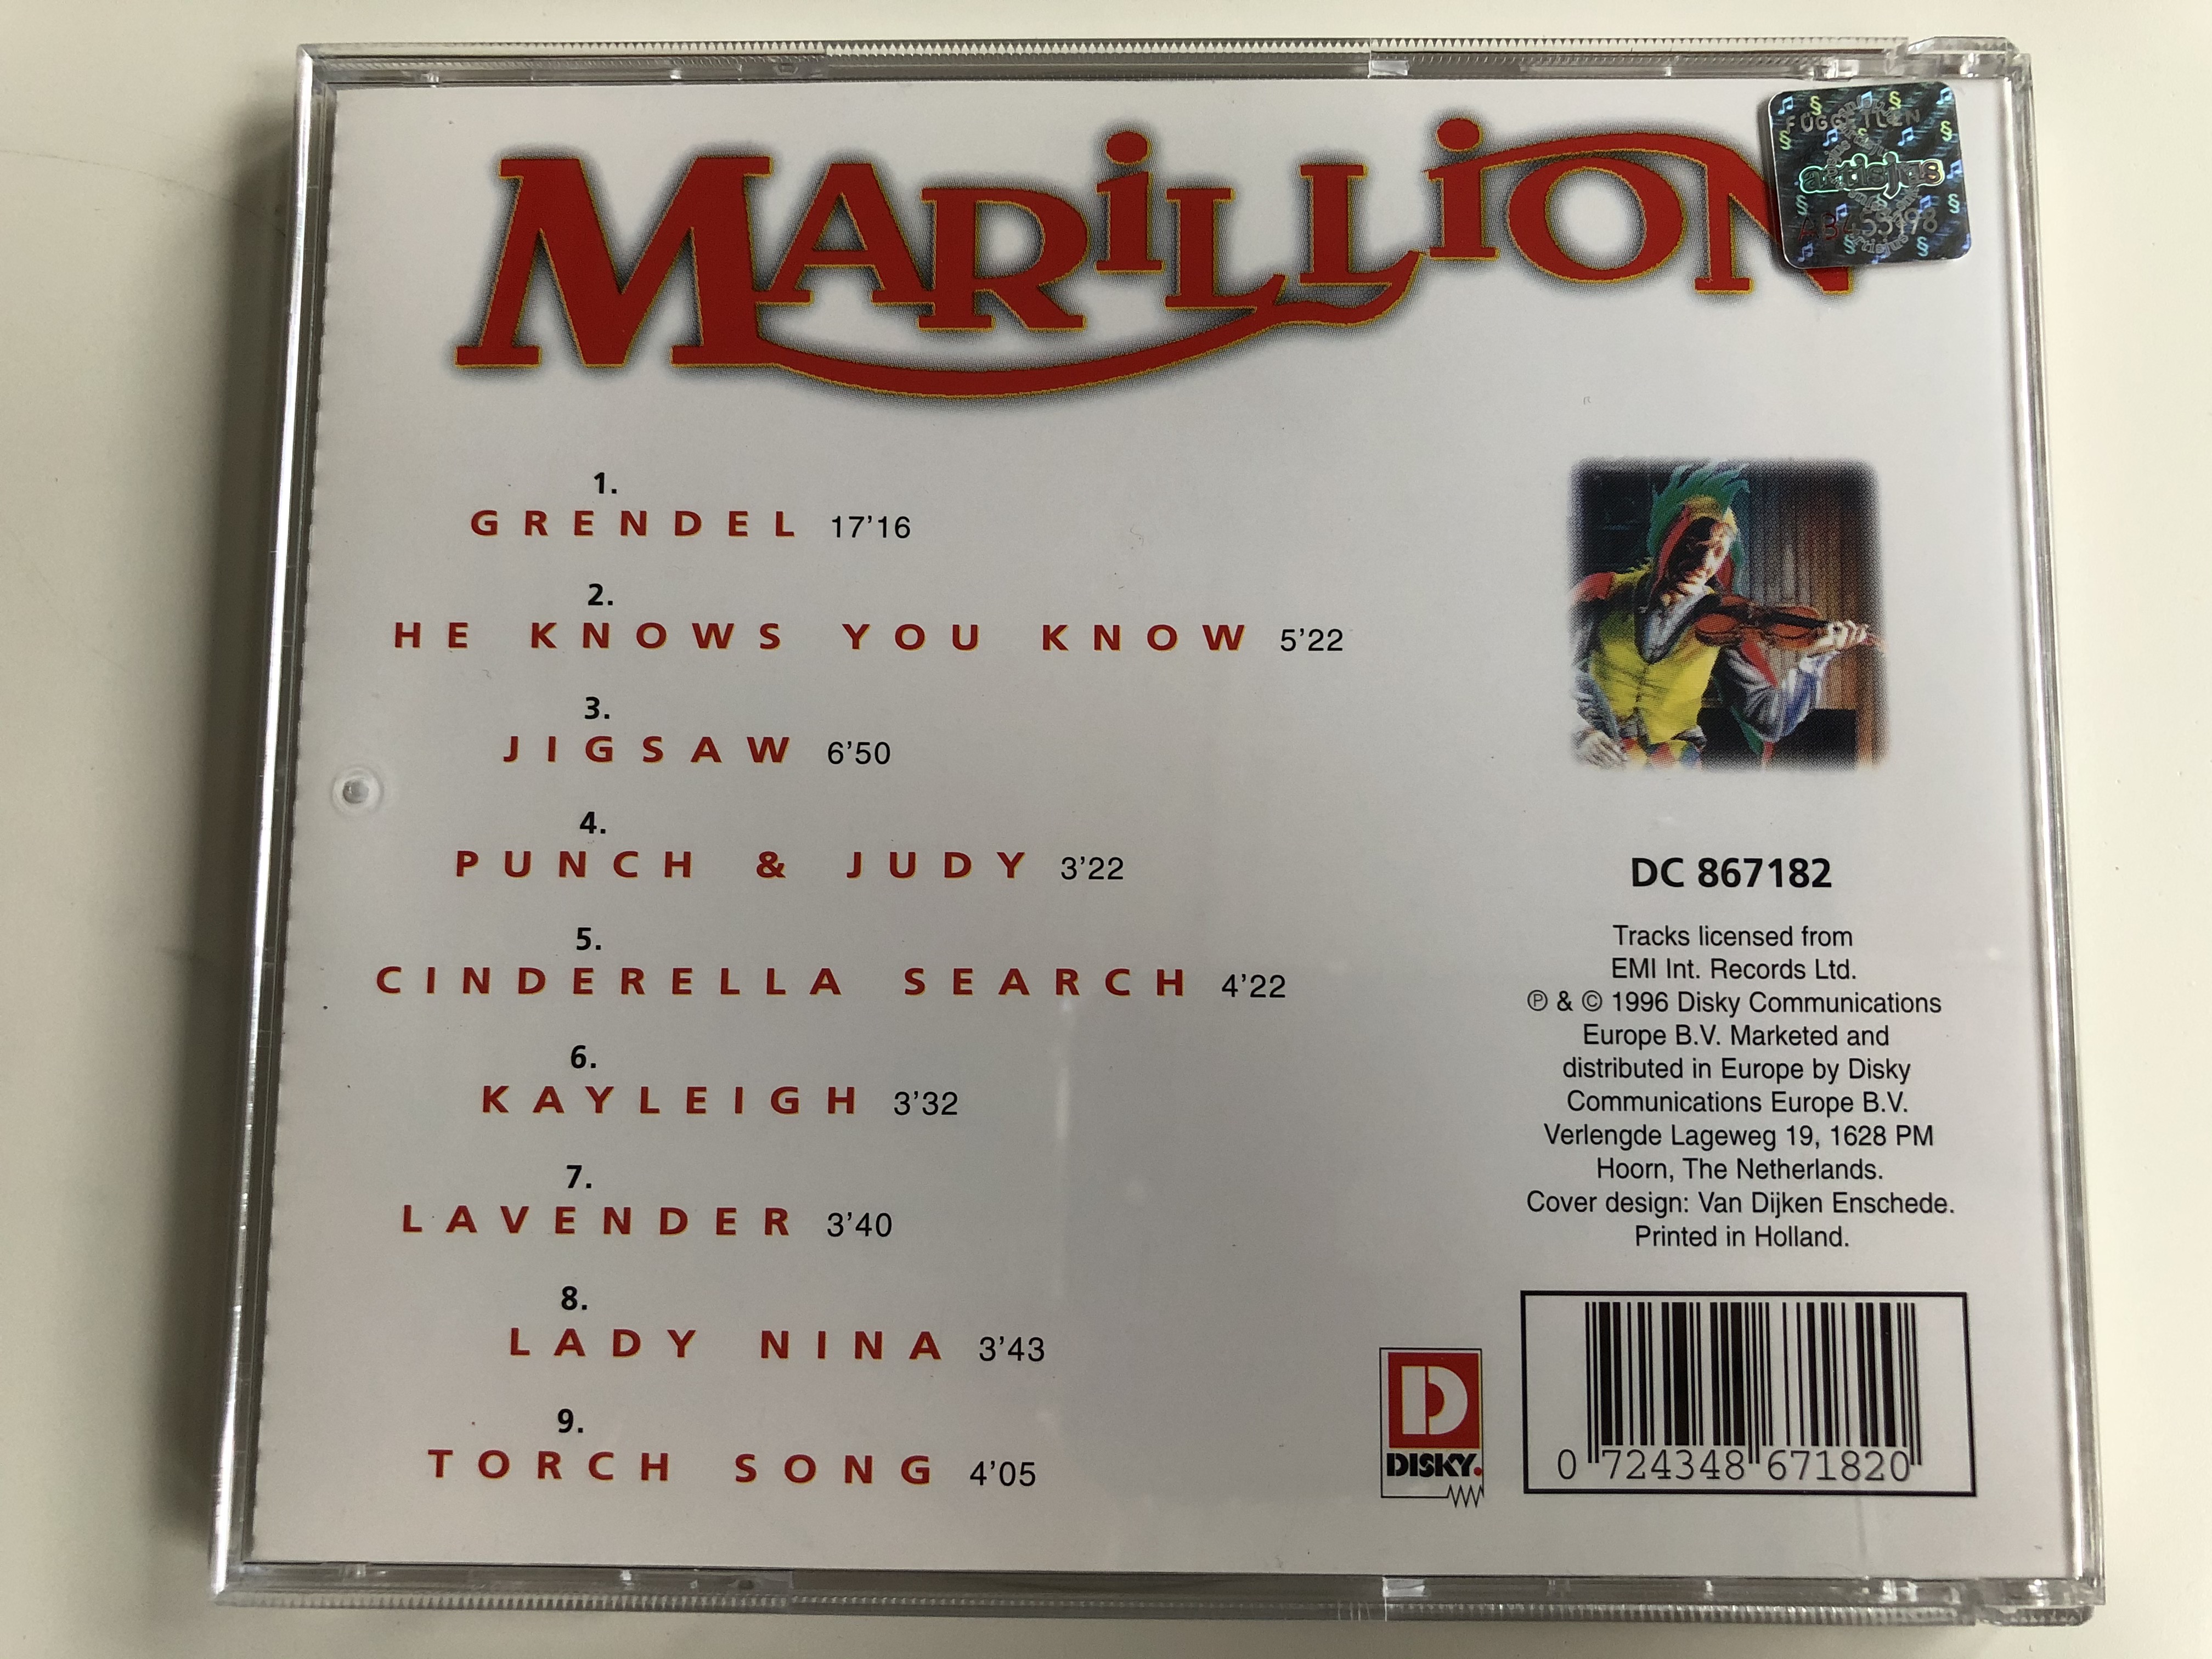 marillion-kayleigh-he-knows-you-know-punch-judy-lavender-torch-song-disky-audio-cd-1996-dc-867182-4-.jpg